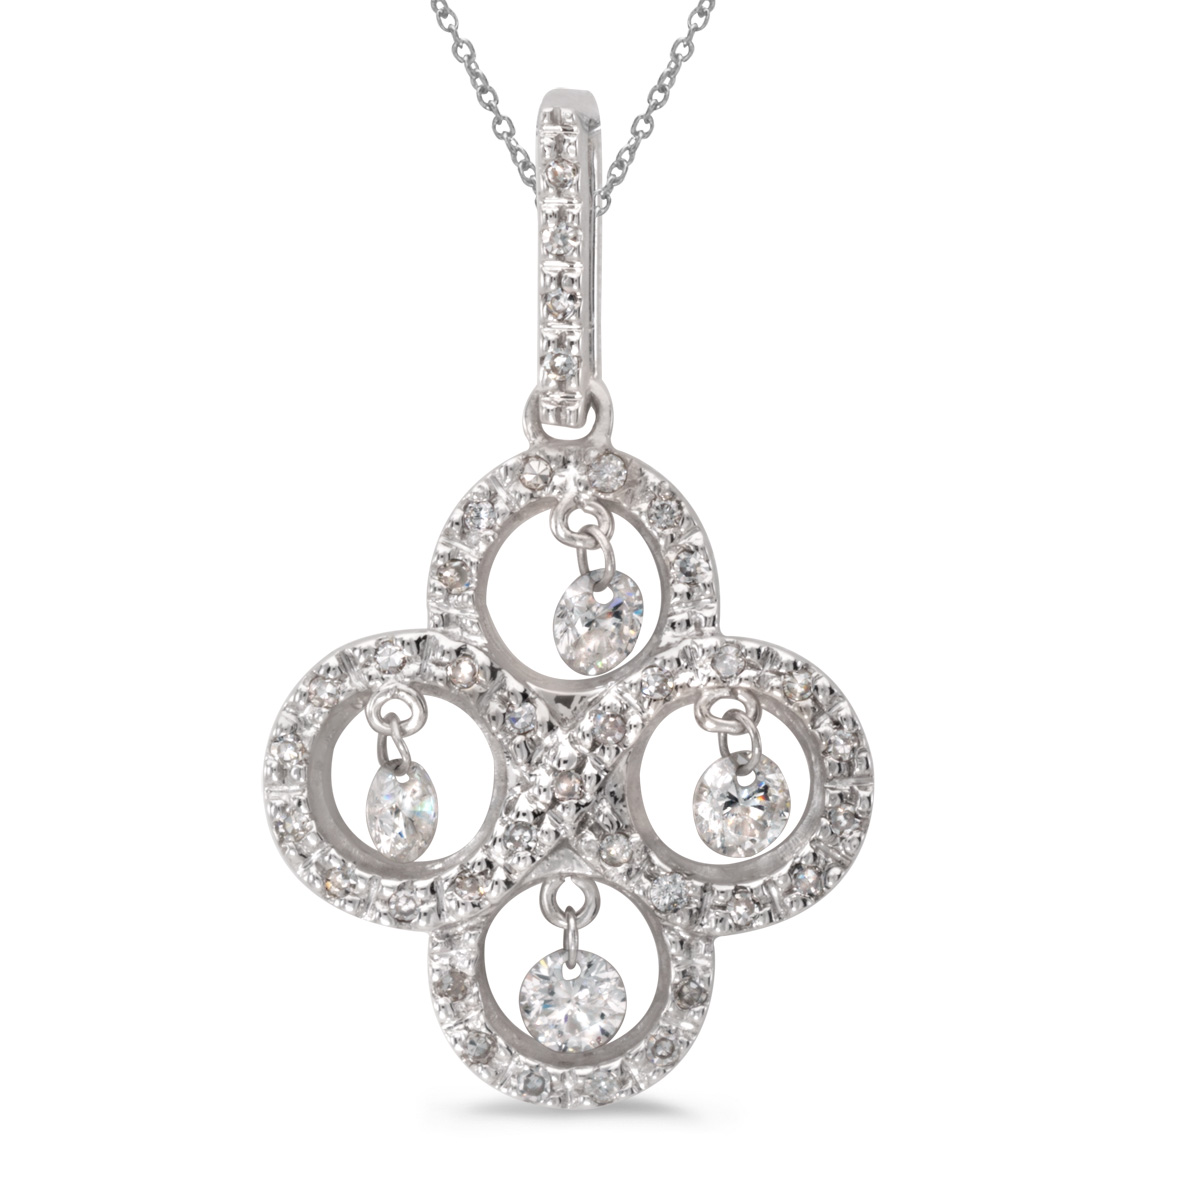 JCX2904: 14k gold Dashinng Diamonds pendant with 0.43 total ct diamonds. The center dangling diamond dances and shimmers with every heartbeat.